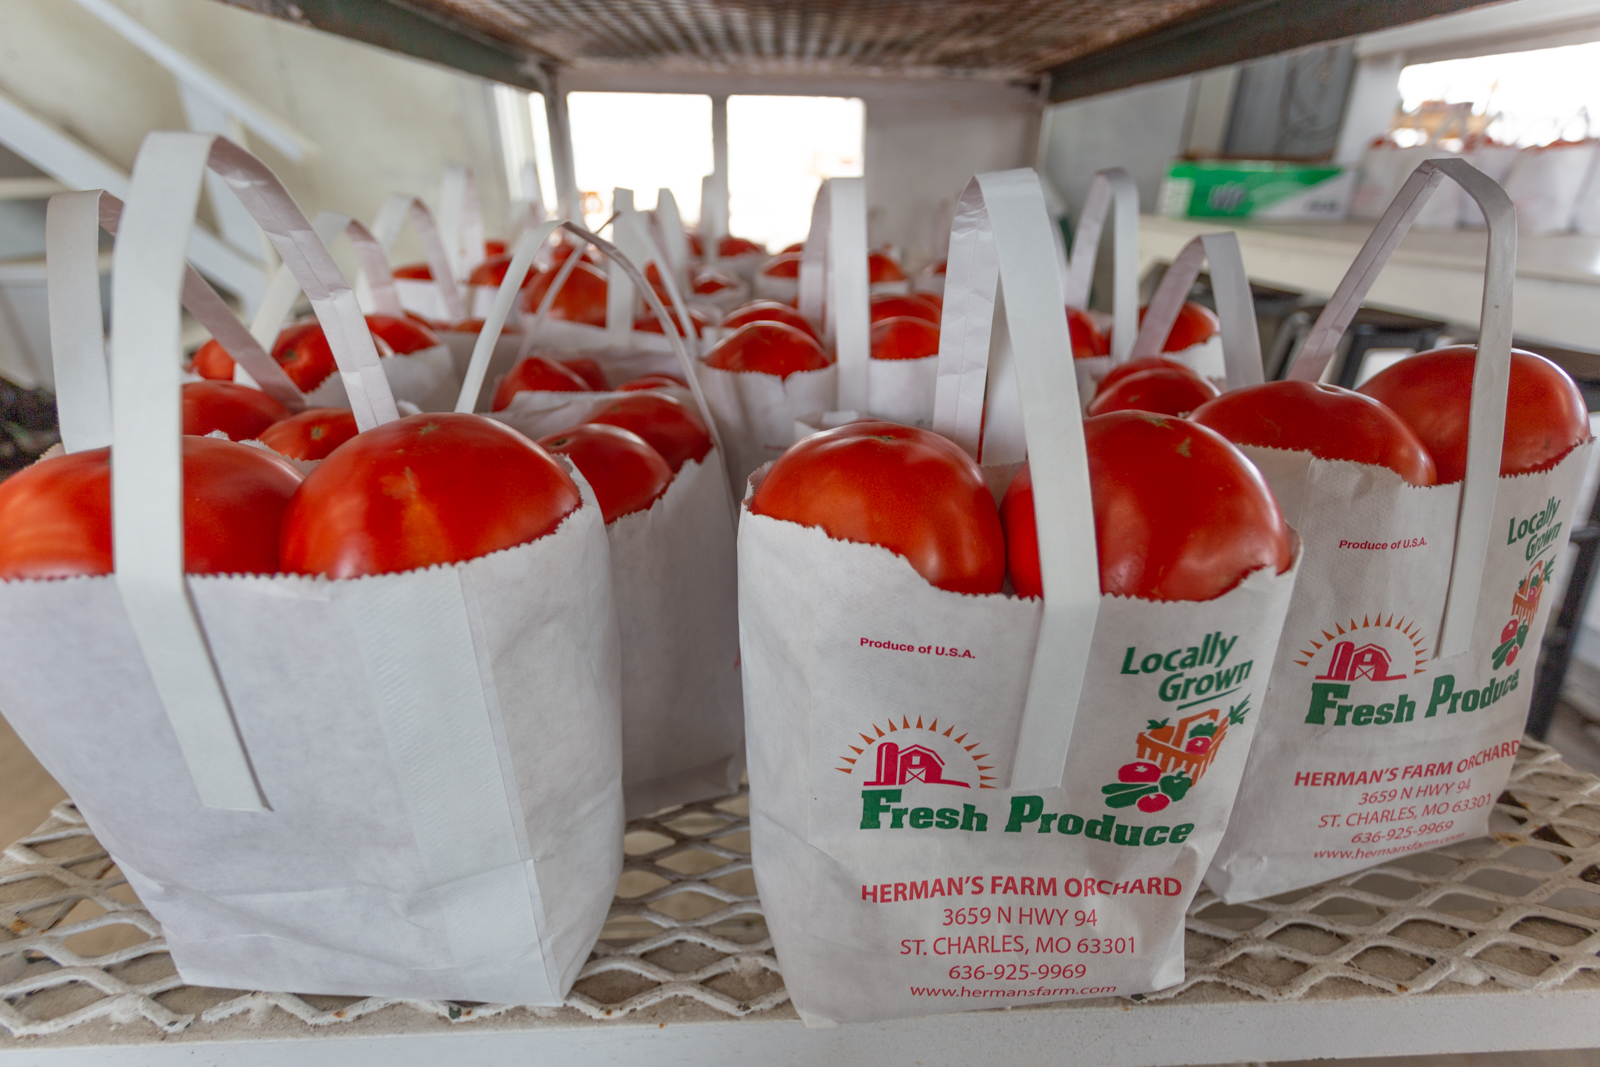 St. Louis tomatoes for sale